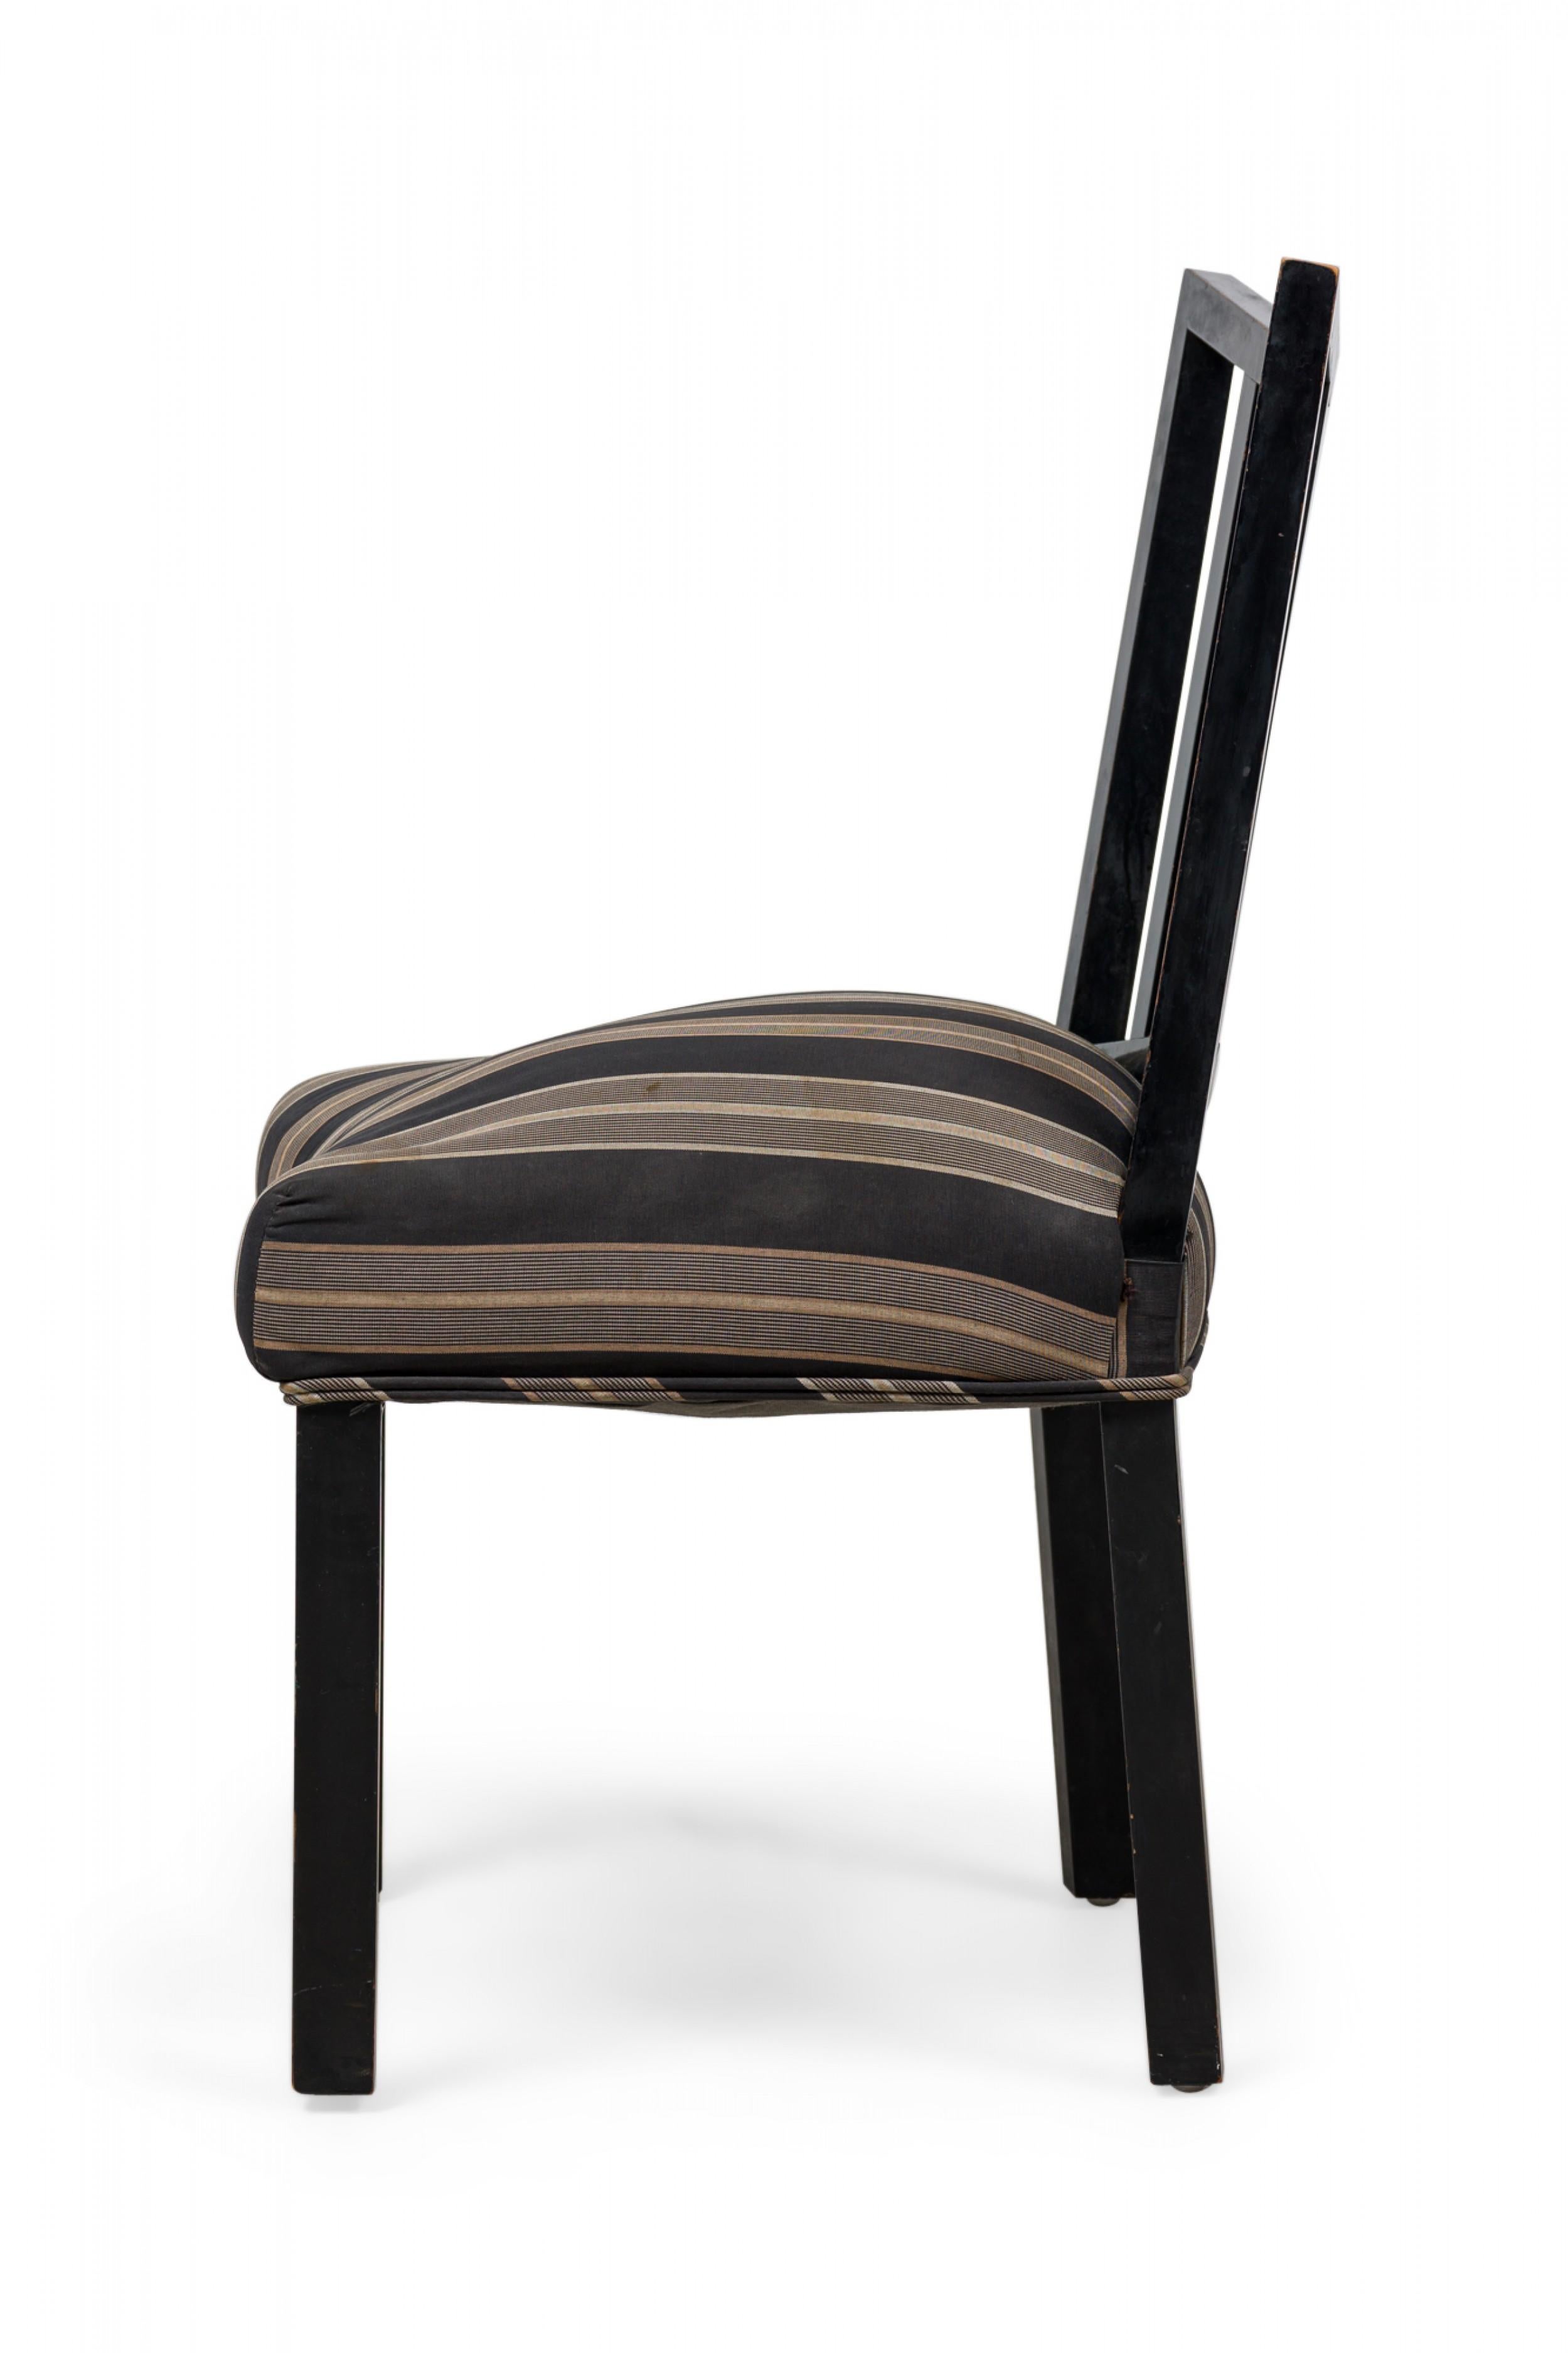 Set of 4 James Mont American Black Lacquered Stripe Upholstered Dining Chairs In Good Condition For Sale In New York, NY